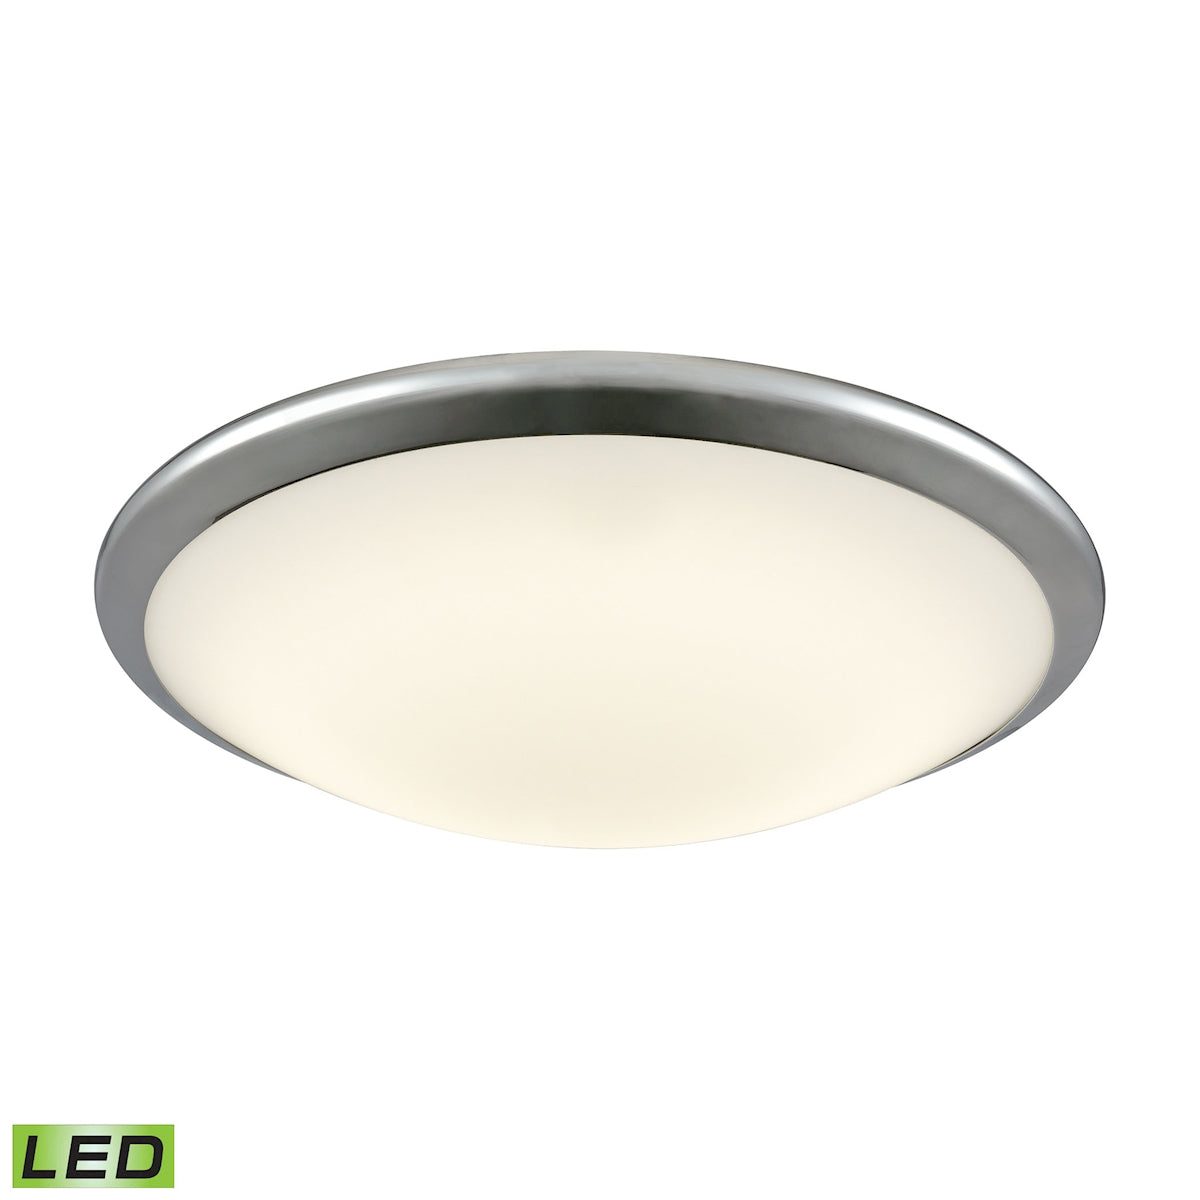 ELK Lighting FML4550-10-15 Clancy 1-Light Round Flush Mount in Chrome with Opal Glass - Integrated LED - Large